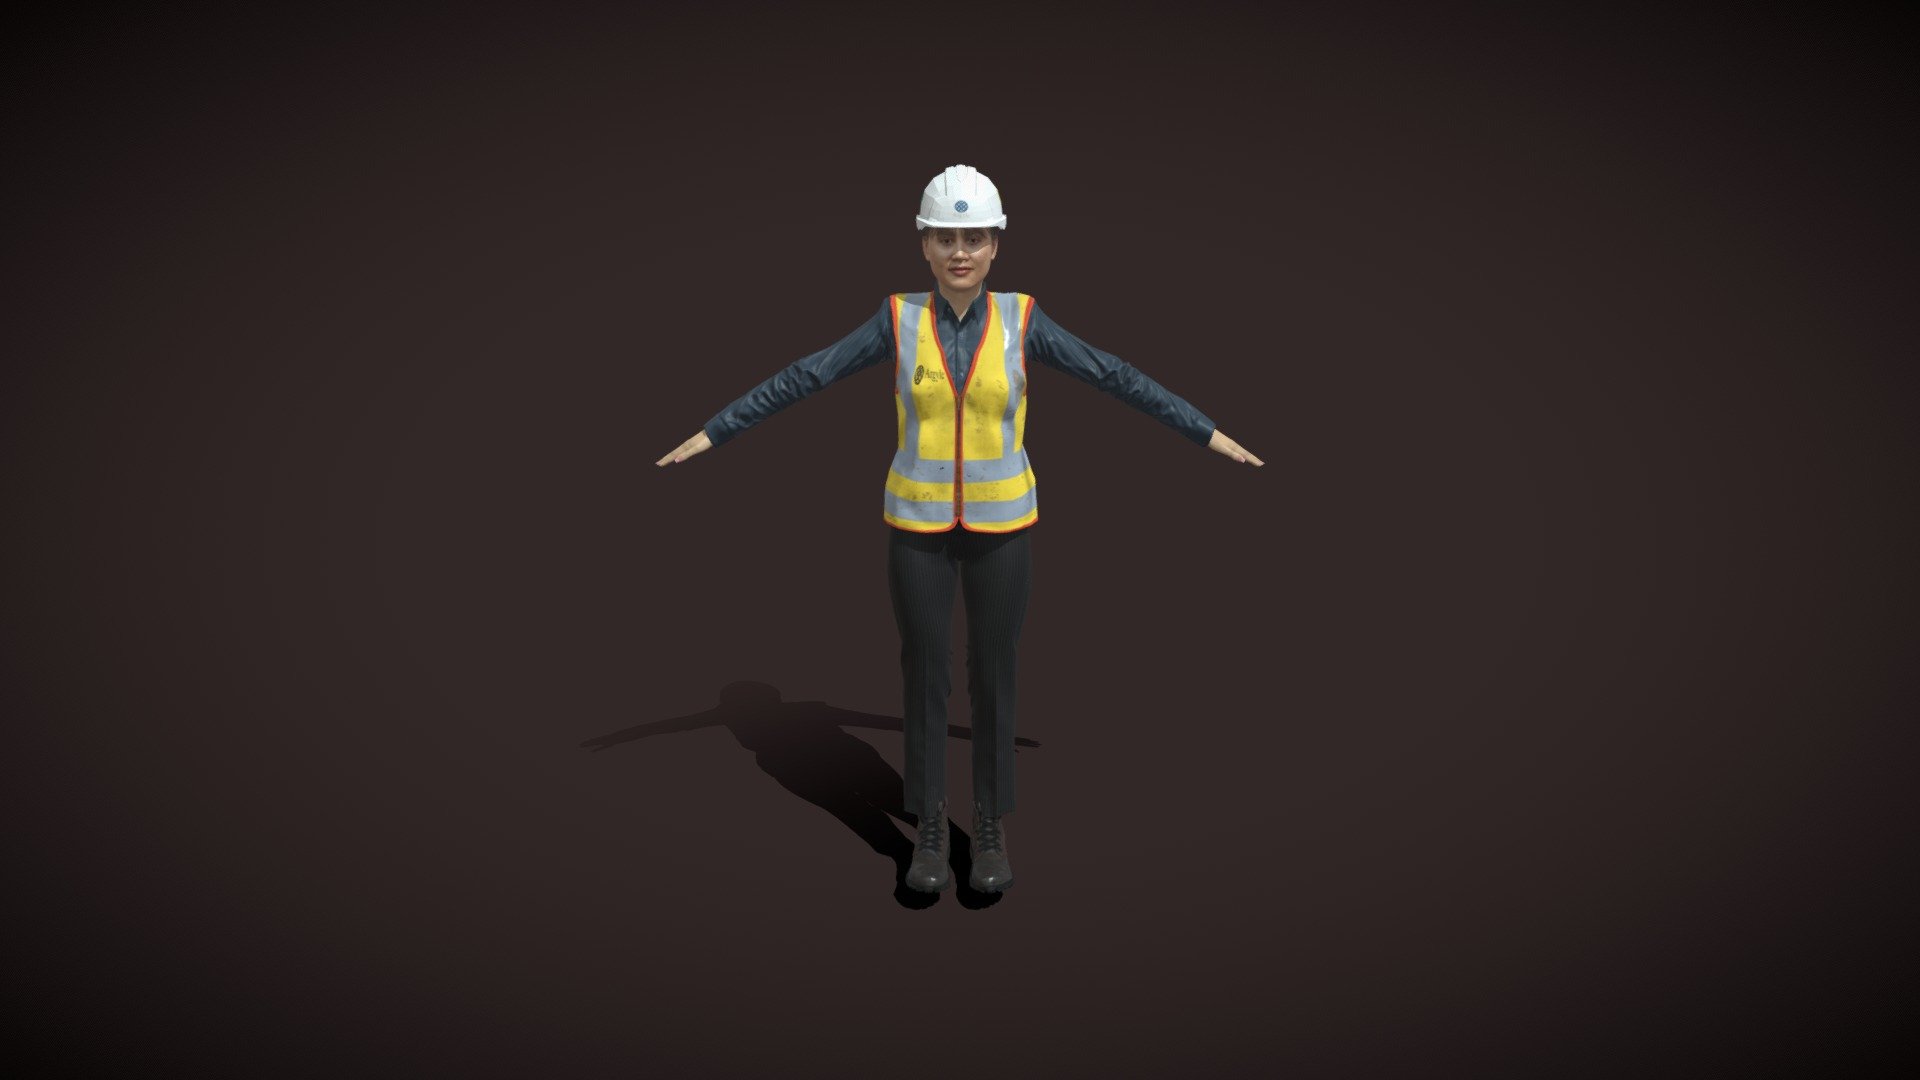 Part of our series of 3D Characters and props for Digital Construction and Architectural, Engineering and Construction simulations. This 3d character is using 1024x1024 textures. However the original uses 4K textures for visuals, gaming and simulations 3d model